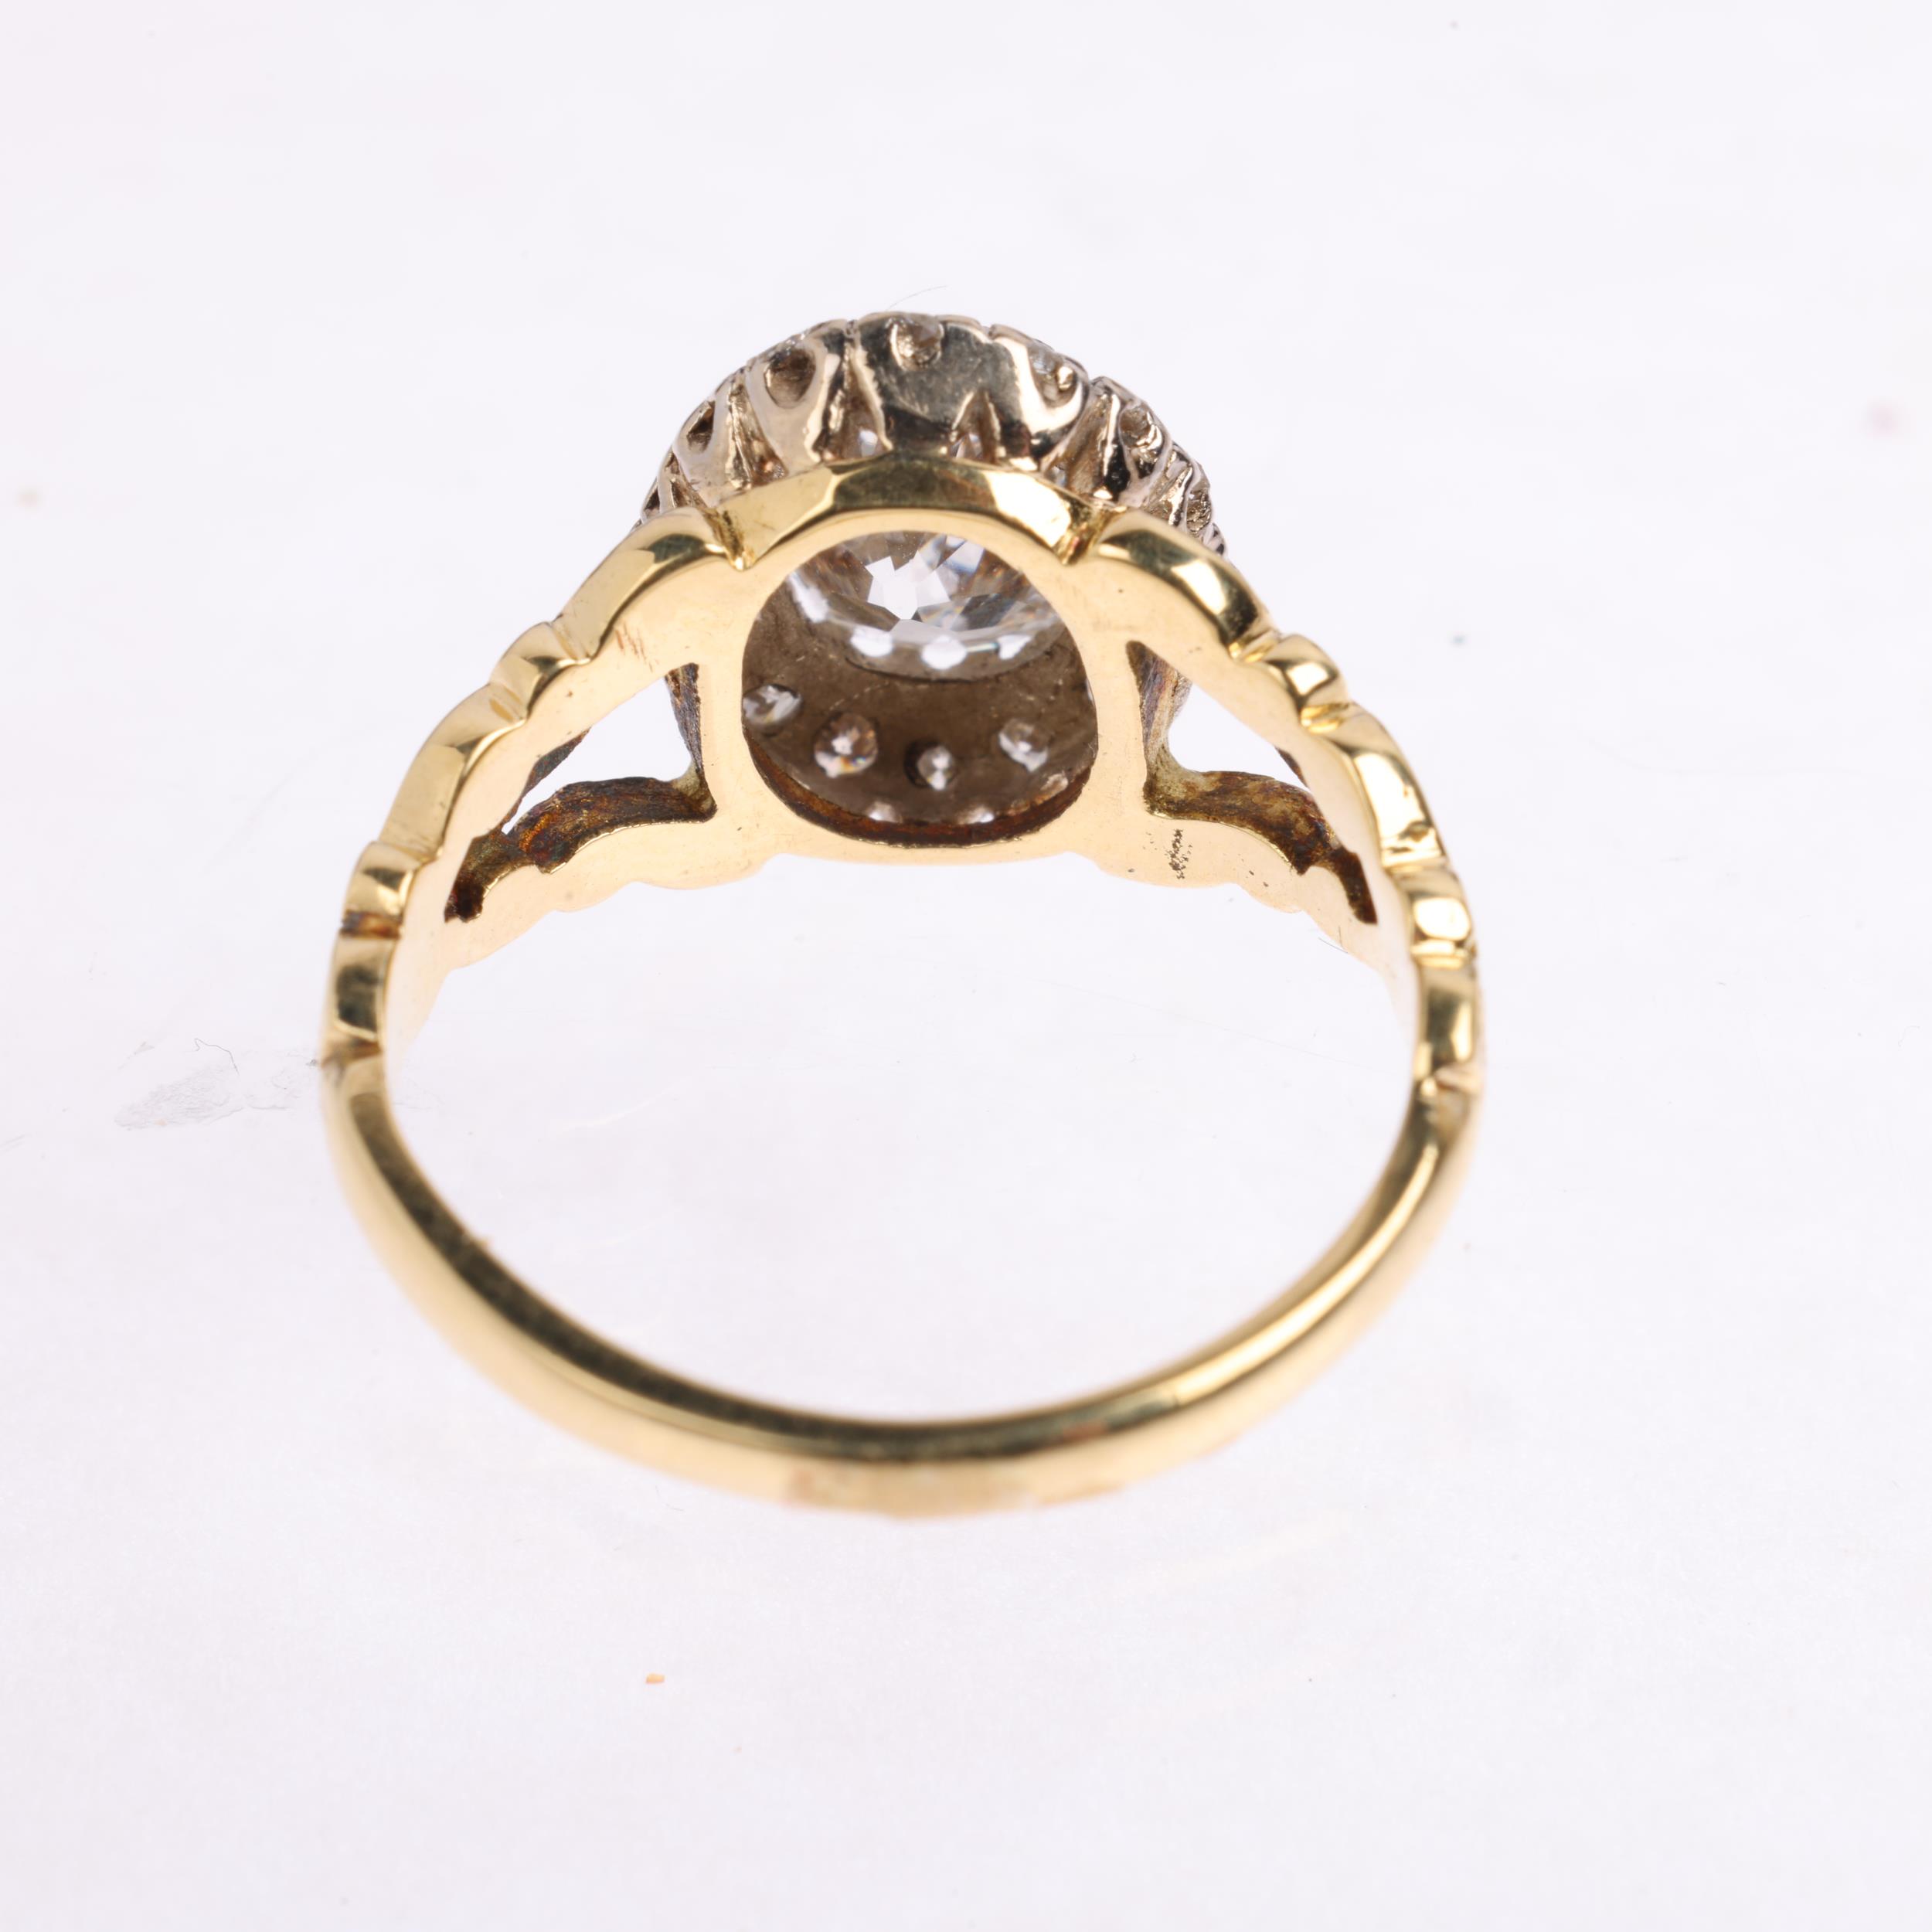 An 18ct gold 1.35ct lab grown diamond cluster ring, centrally claw set with 1.3ct oval mixed-cut lab - Image 3 of 4